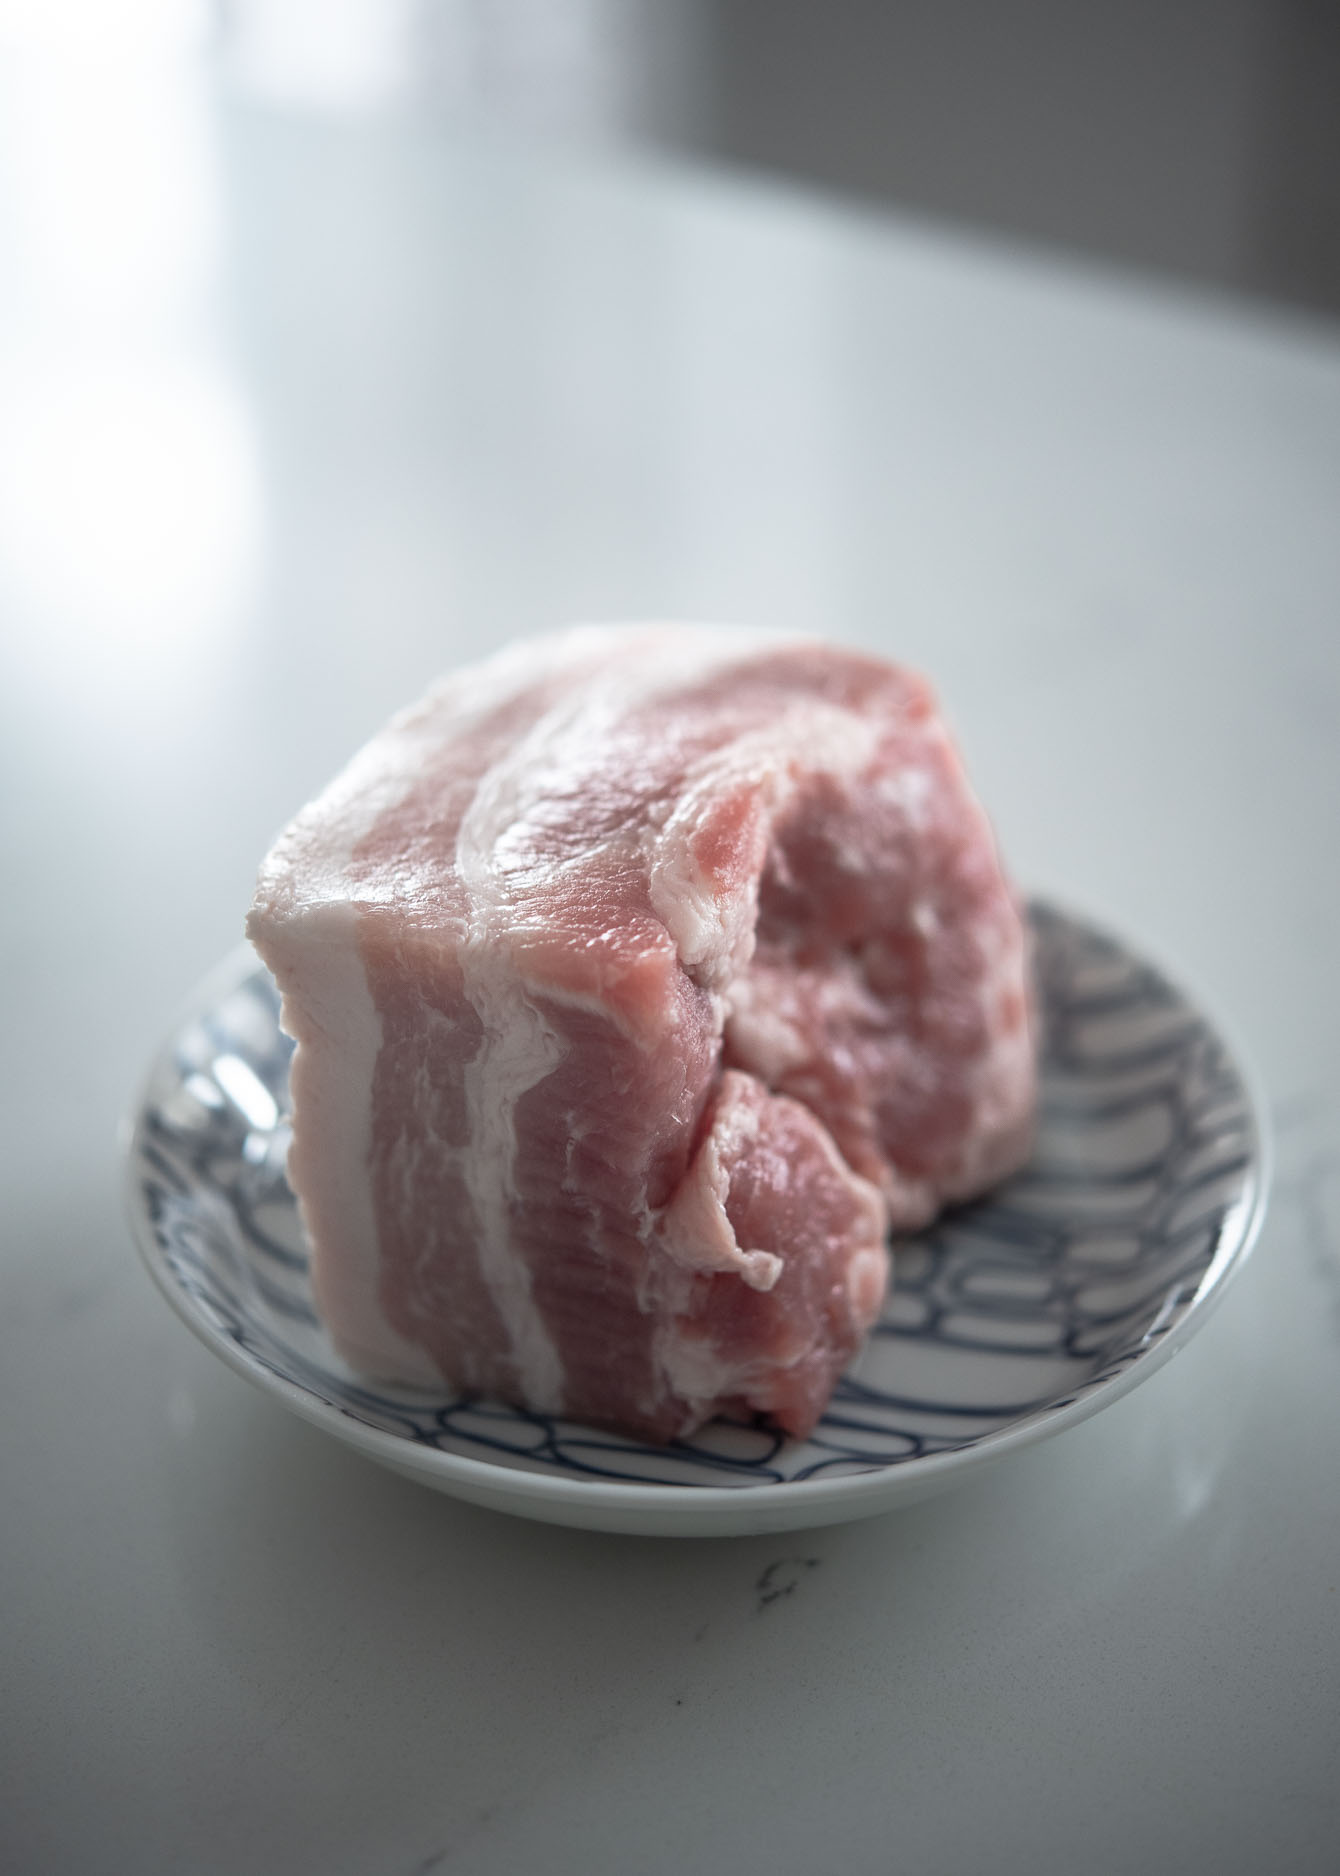 A chunk of pork belly is on a small plate showing the fat and flesh layers